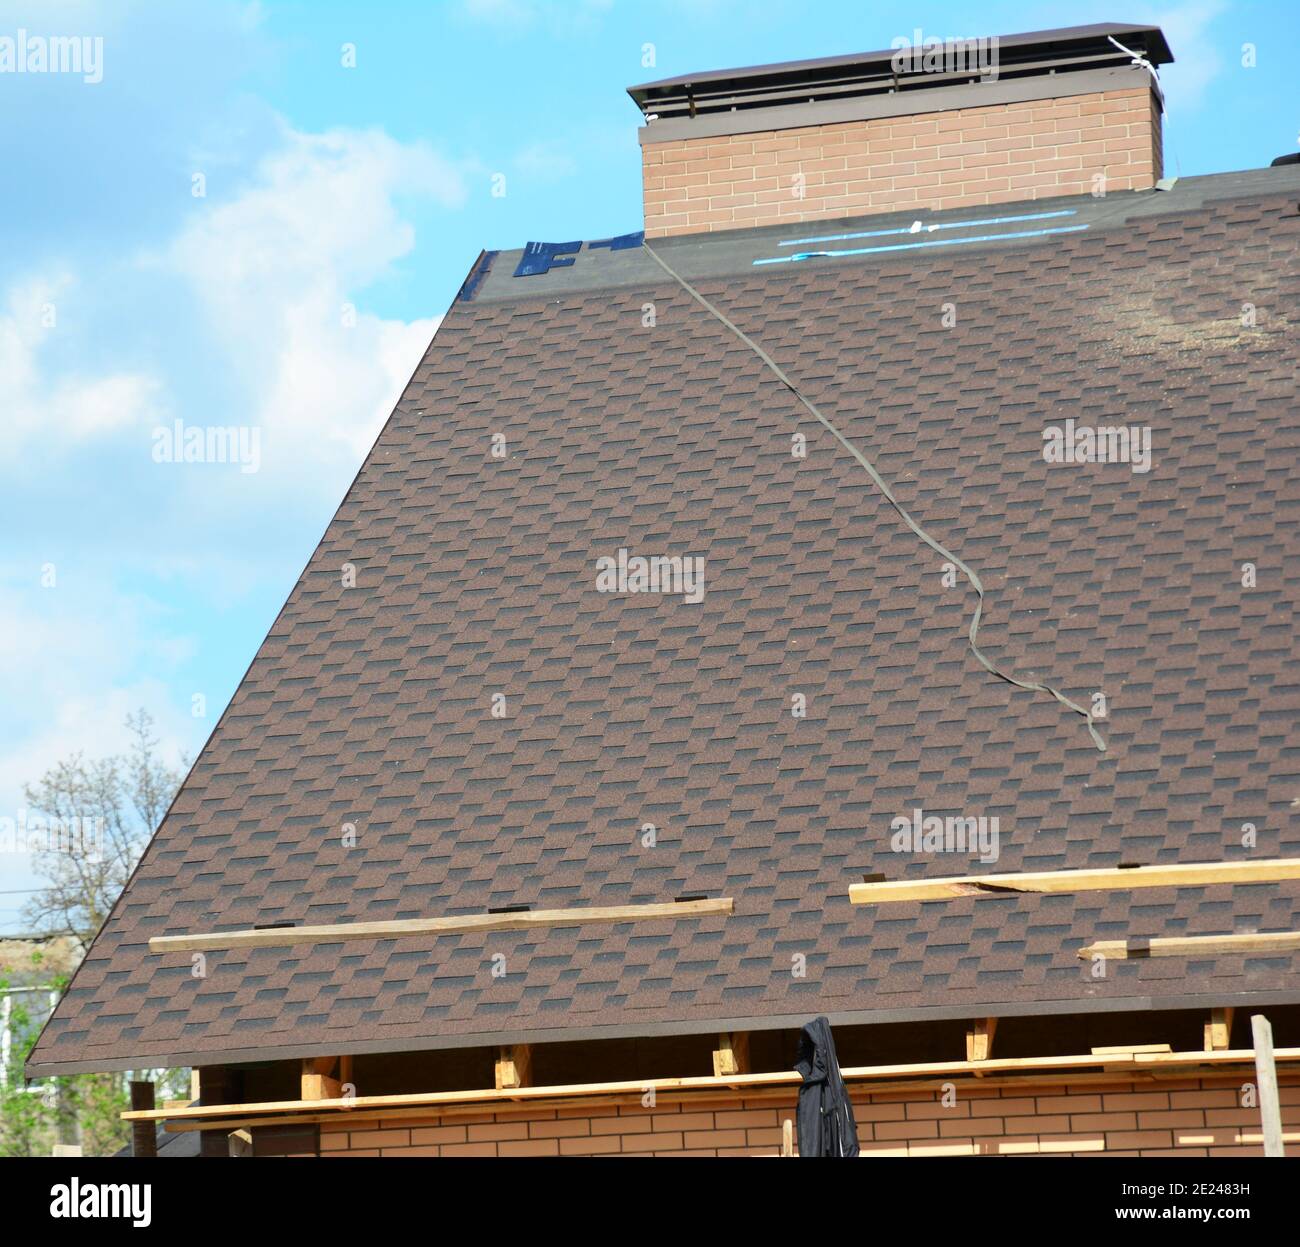 Incomplete roof with asphalt shingles installation on underlayment. Asphalt shingle tiles at the ridge of the rooftop near a chimney with flashing. Stock Photo